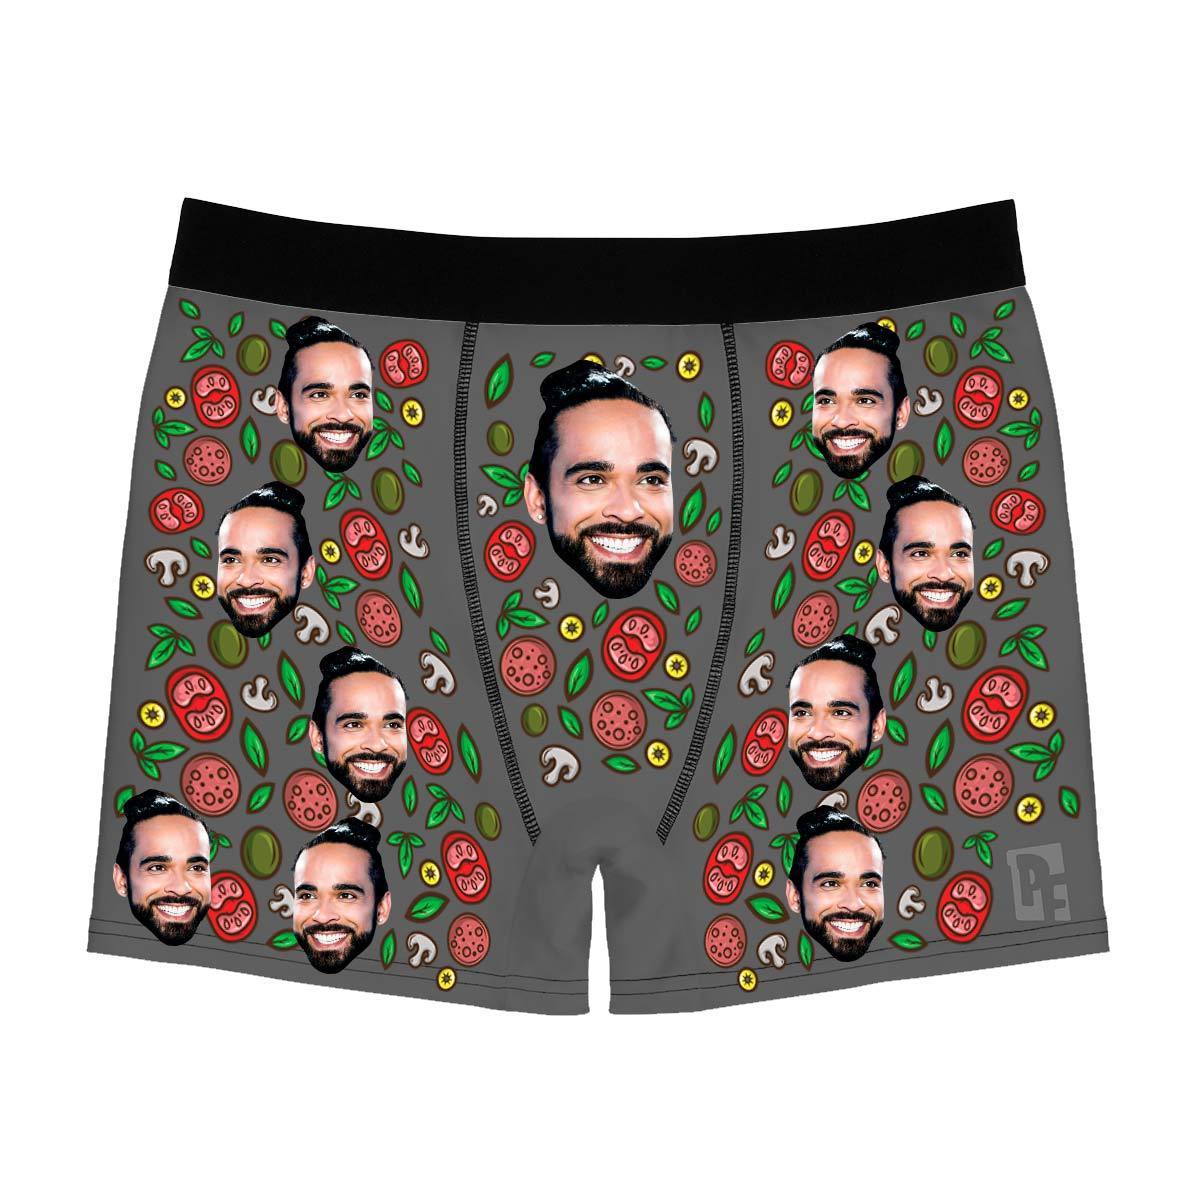 Dark Pizza men's boxer briefs personalized with photo printed on them